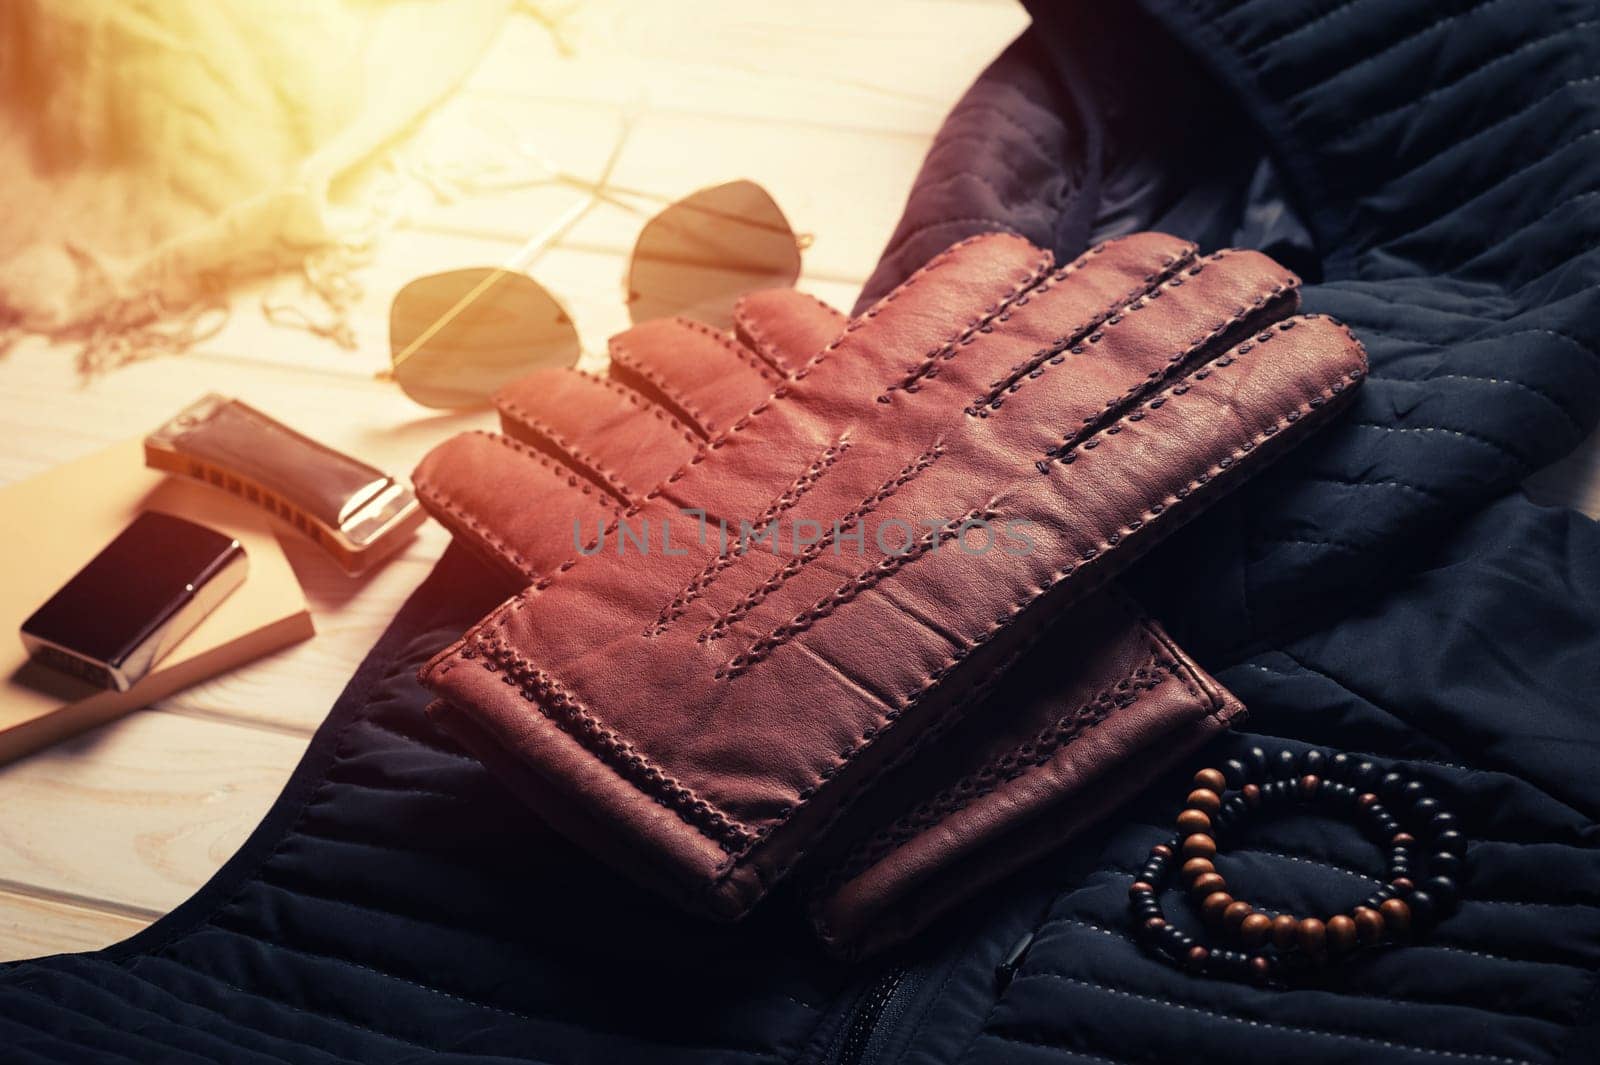 Pair of men's brown leather gloves and other men's accessories on wood background.